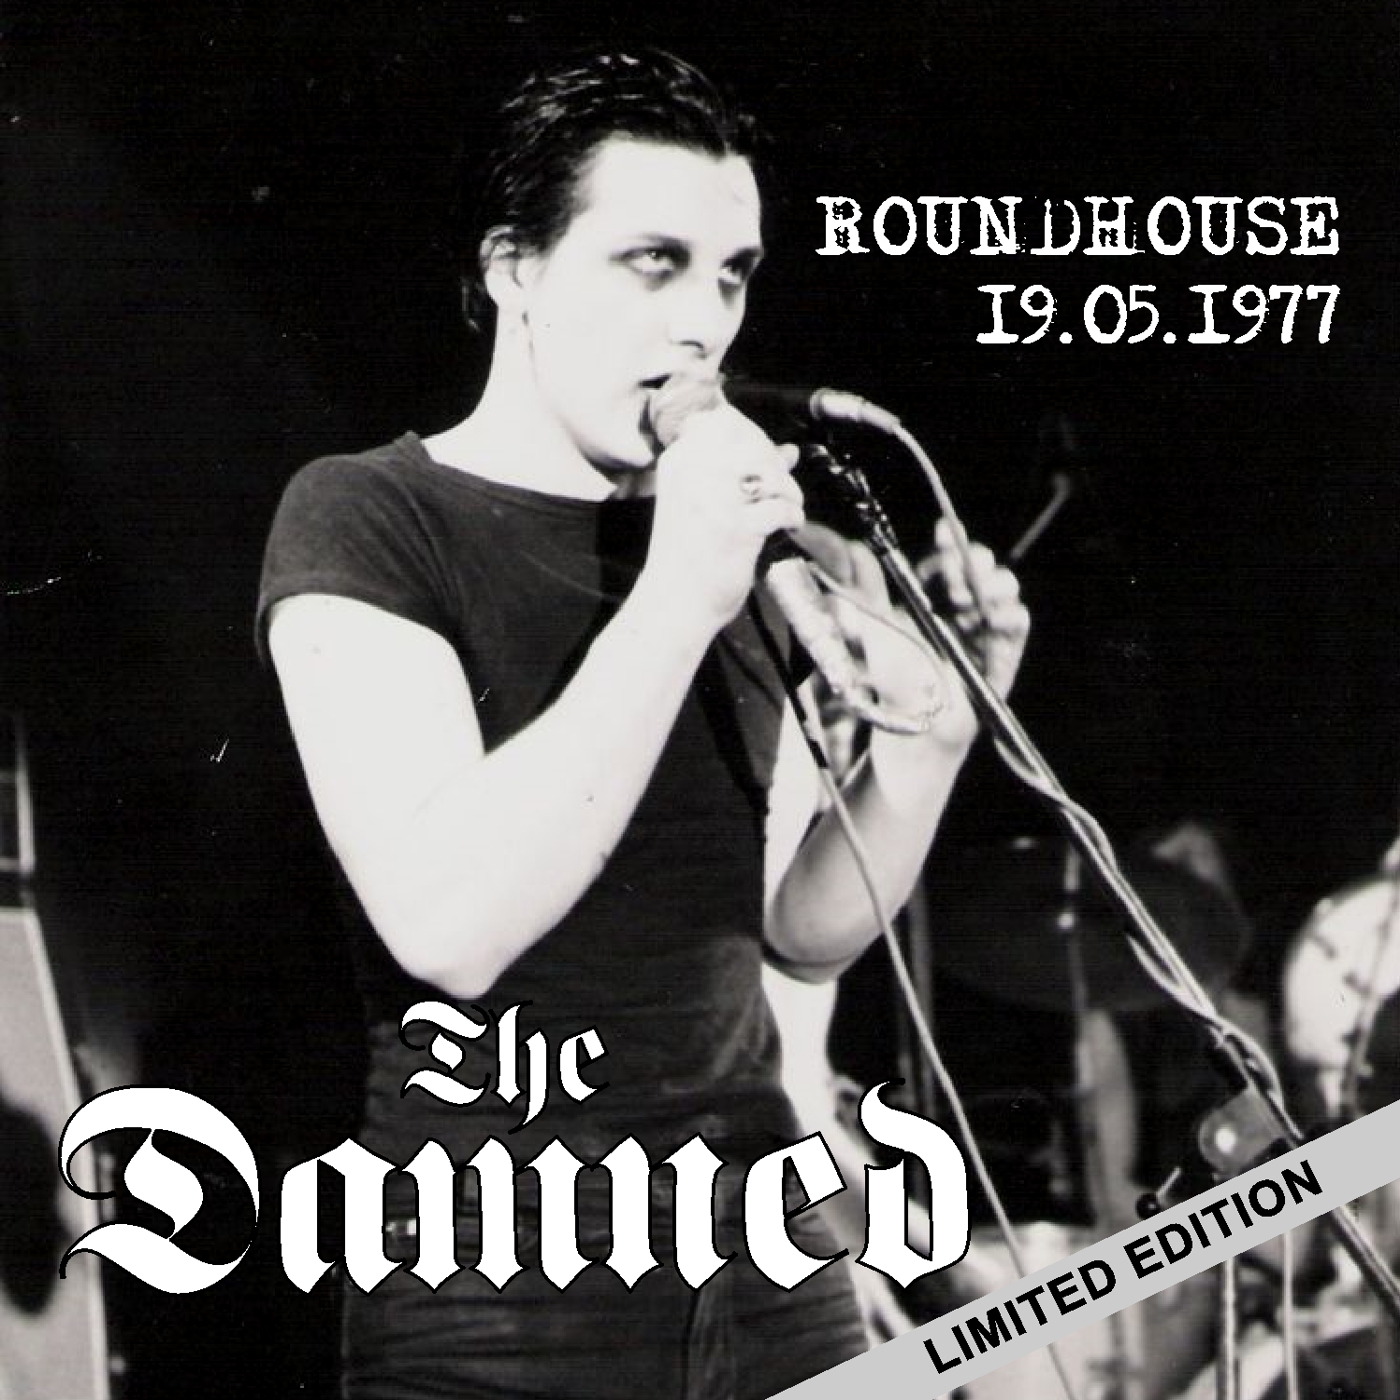 Damned Roundhouse 1977